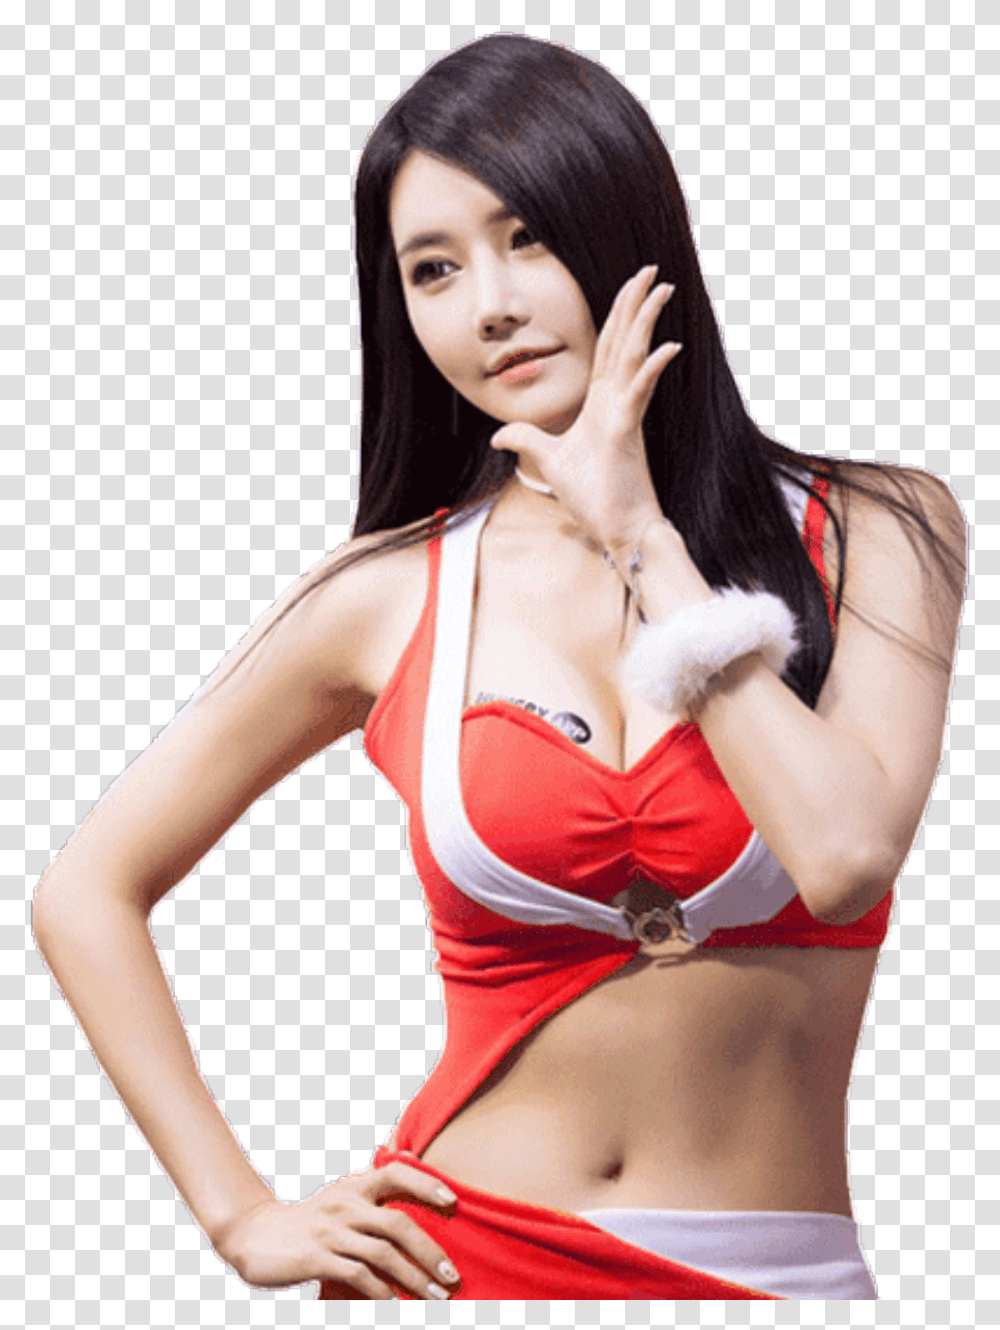 Casino Girl Chip, Costume, Person, Lingerie Transparent Png